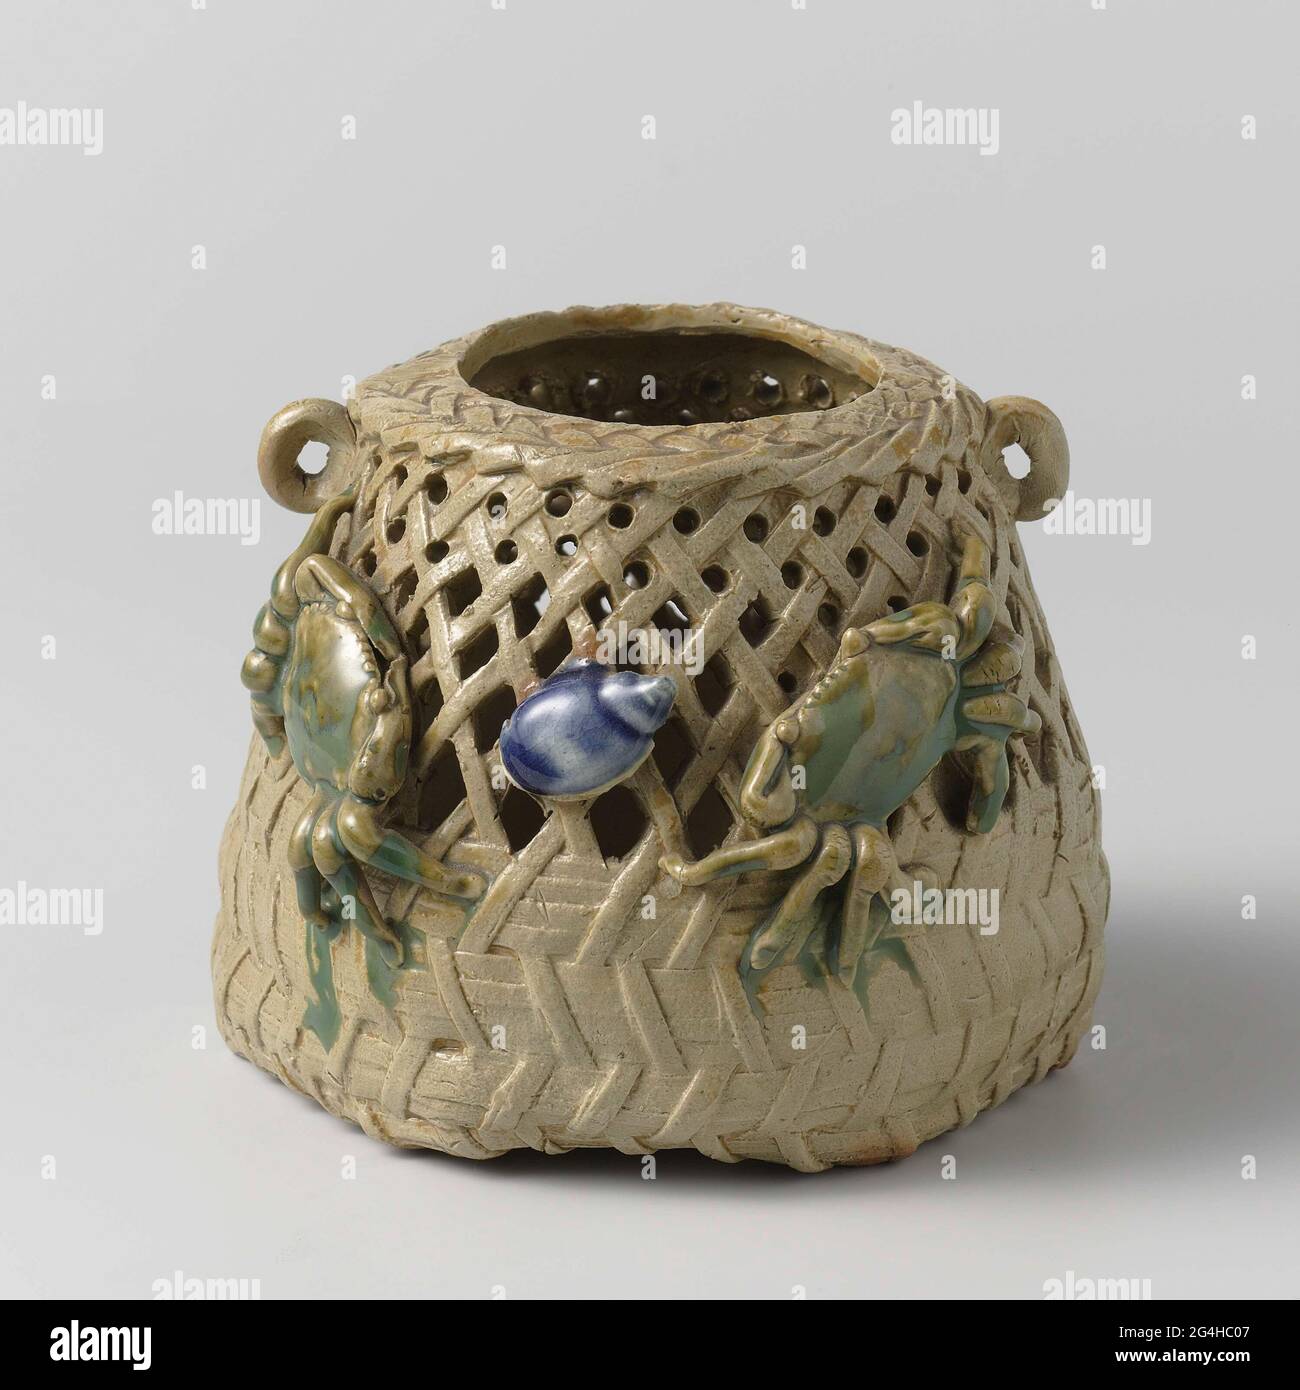 . Pot of stoneware in the shape of a basket with openwork wall and two small, raised ears, painted on the glaze in blue and green. Two modeled crabs and a shell on the outside wall. Six holes in the soil. Stock Photo